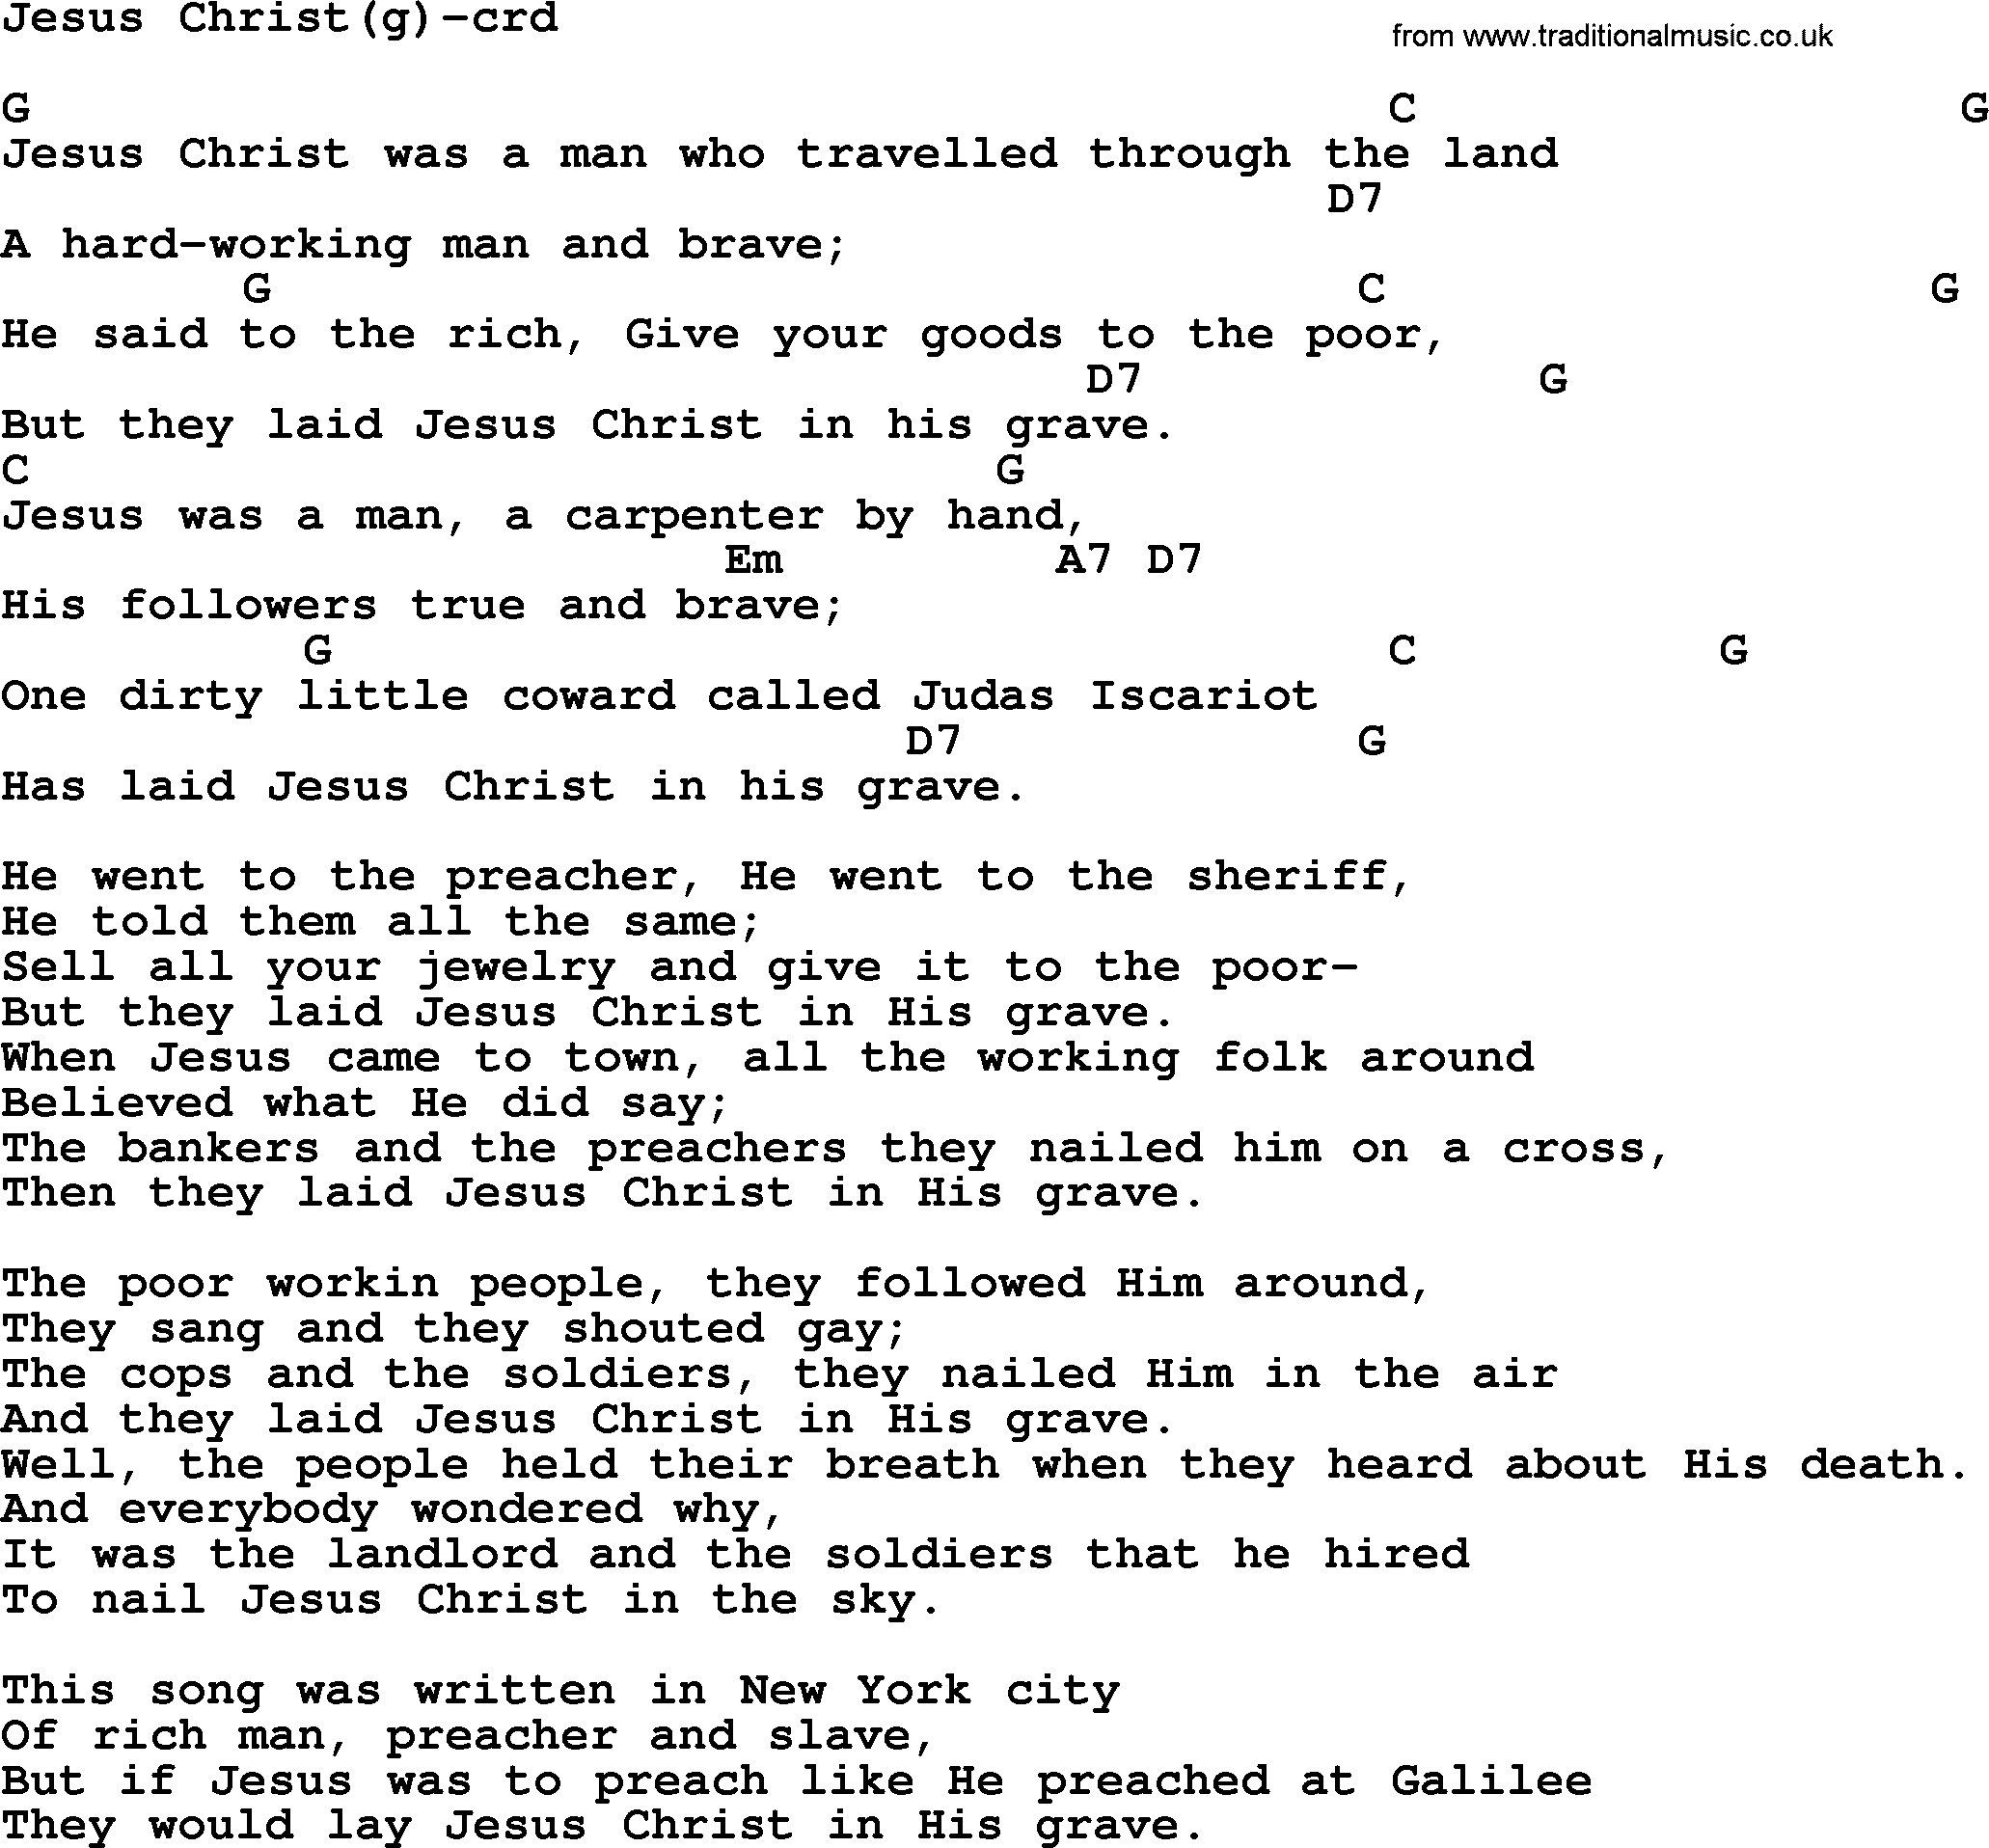 Woody Guthrie song Jesus Christ(g) lyrics and chords